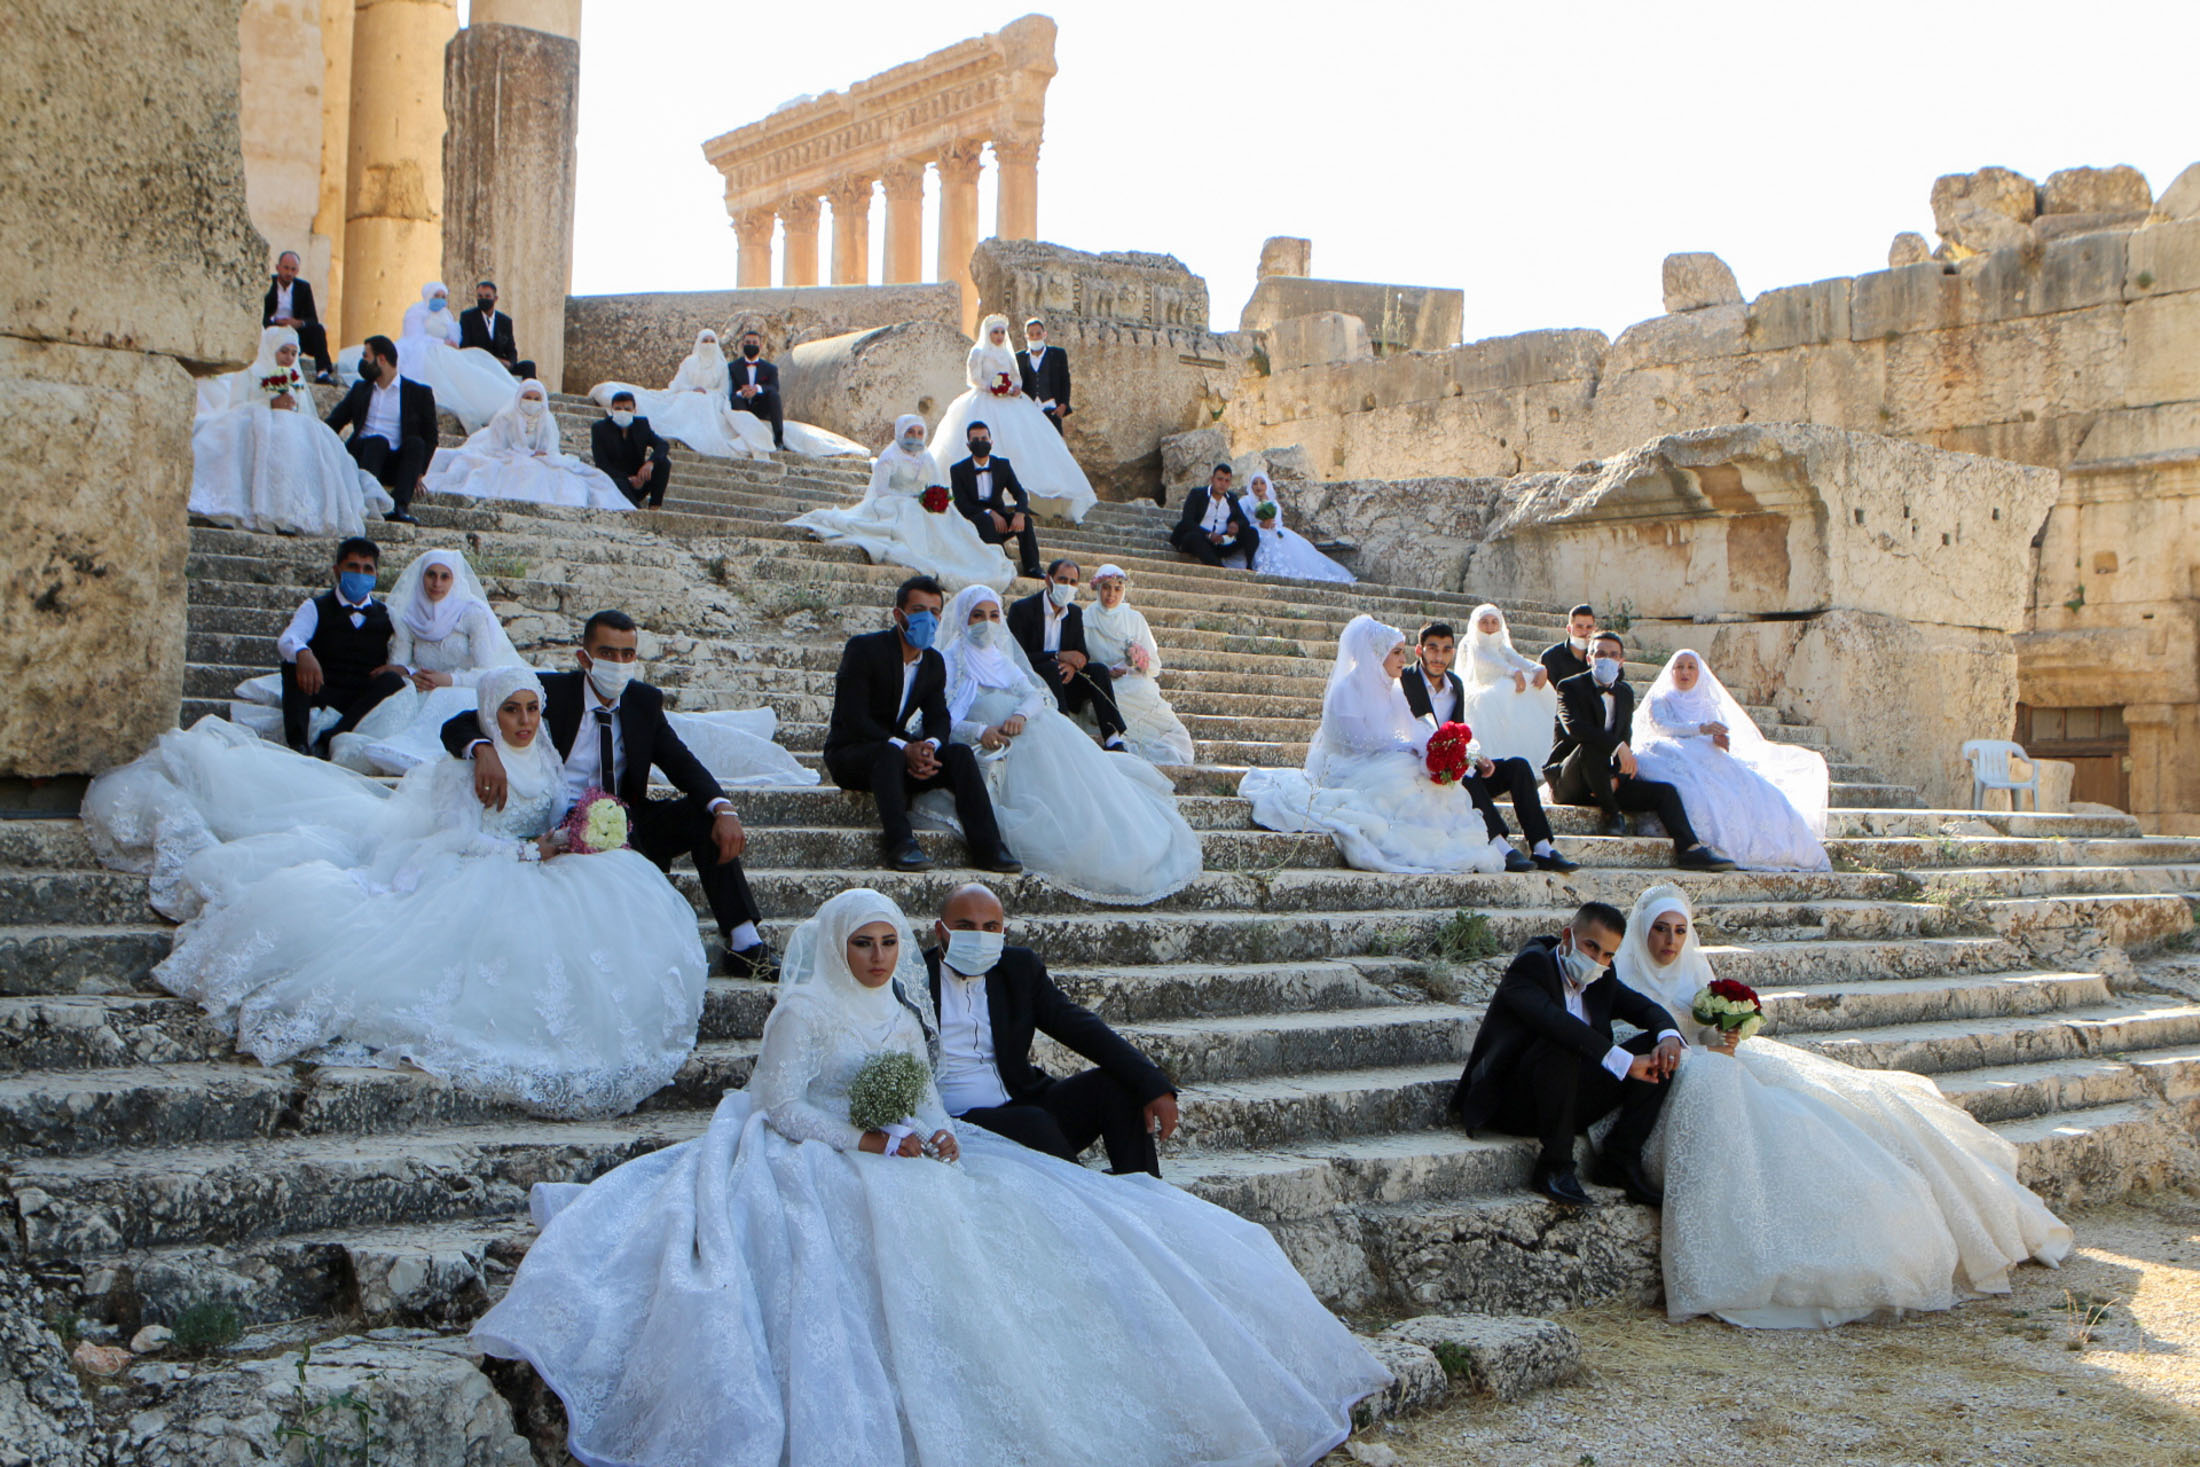 Weddings this fall are likely to feature masks and outdoor events.
(Photo by AFP via Getty Images)